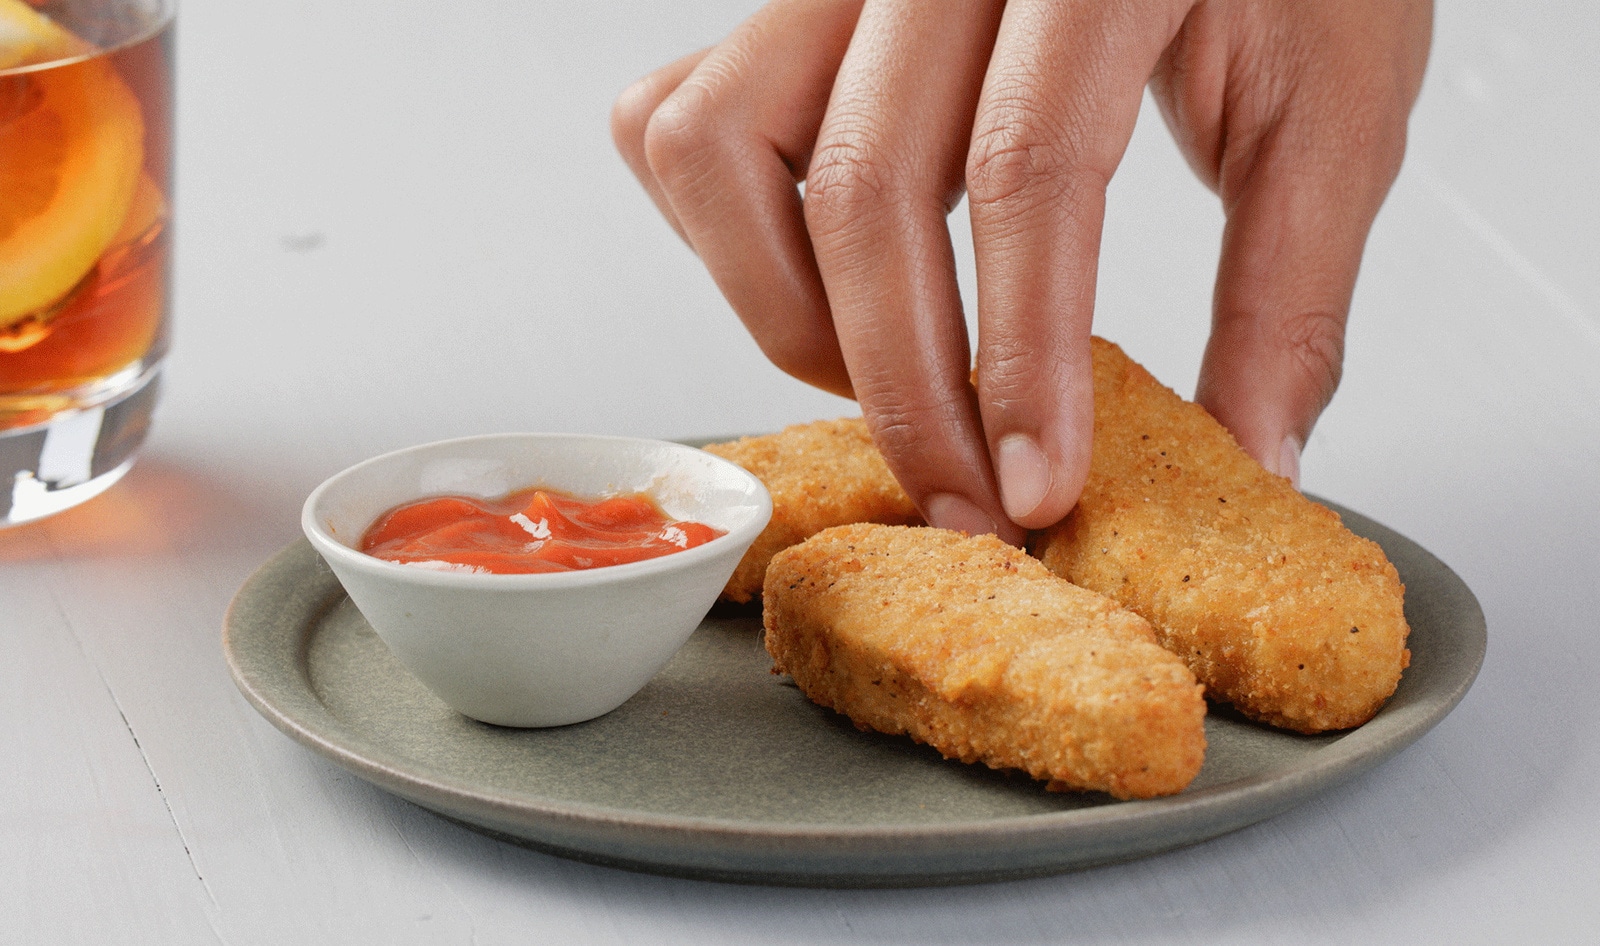 After Walmart Debut, Beyond Meat's Vegan Chicken Tenders Come to 8,000 Stores